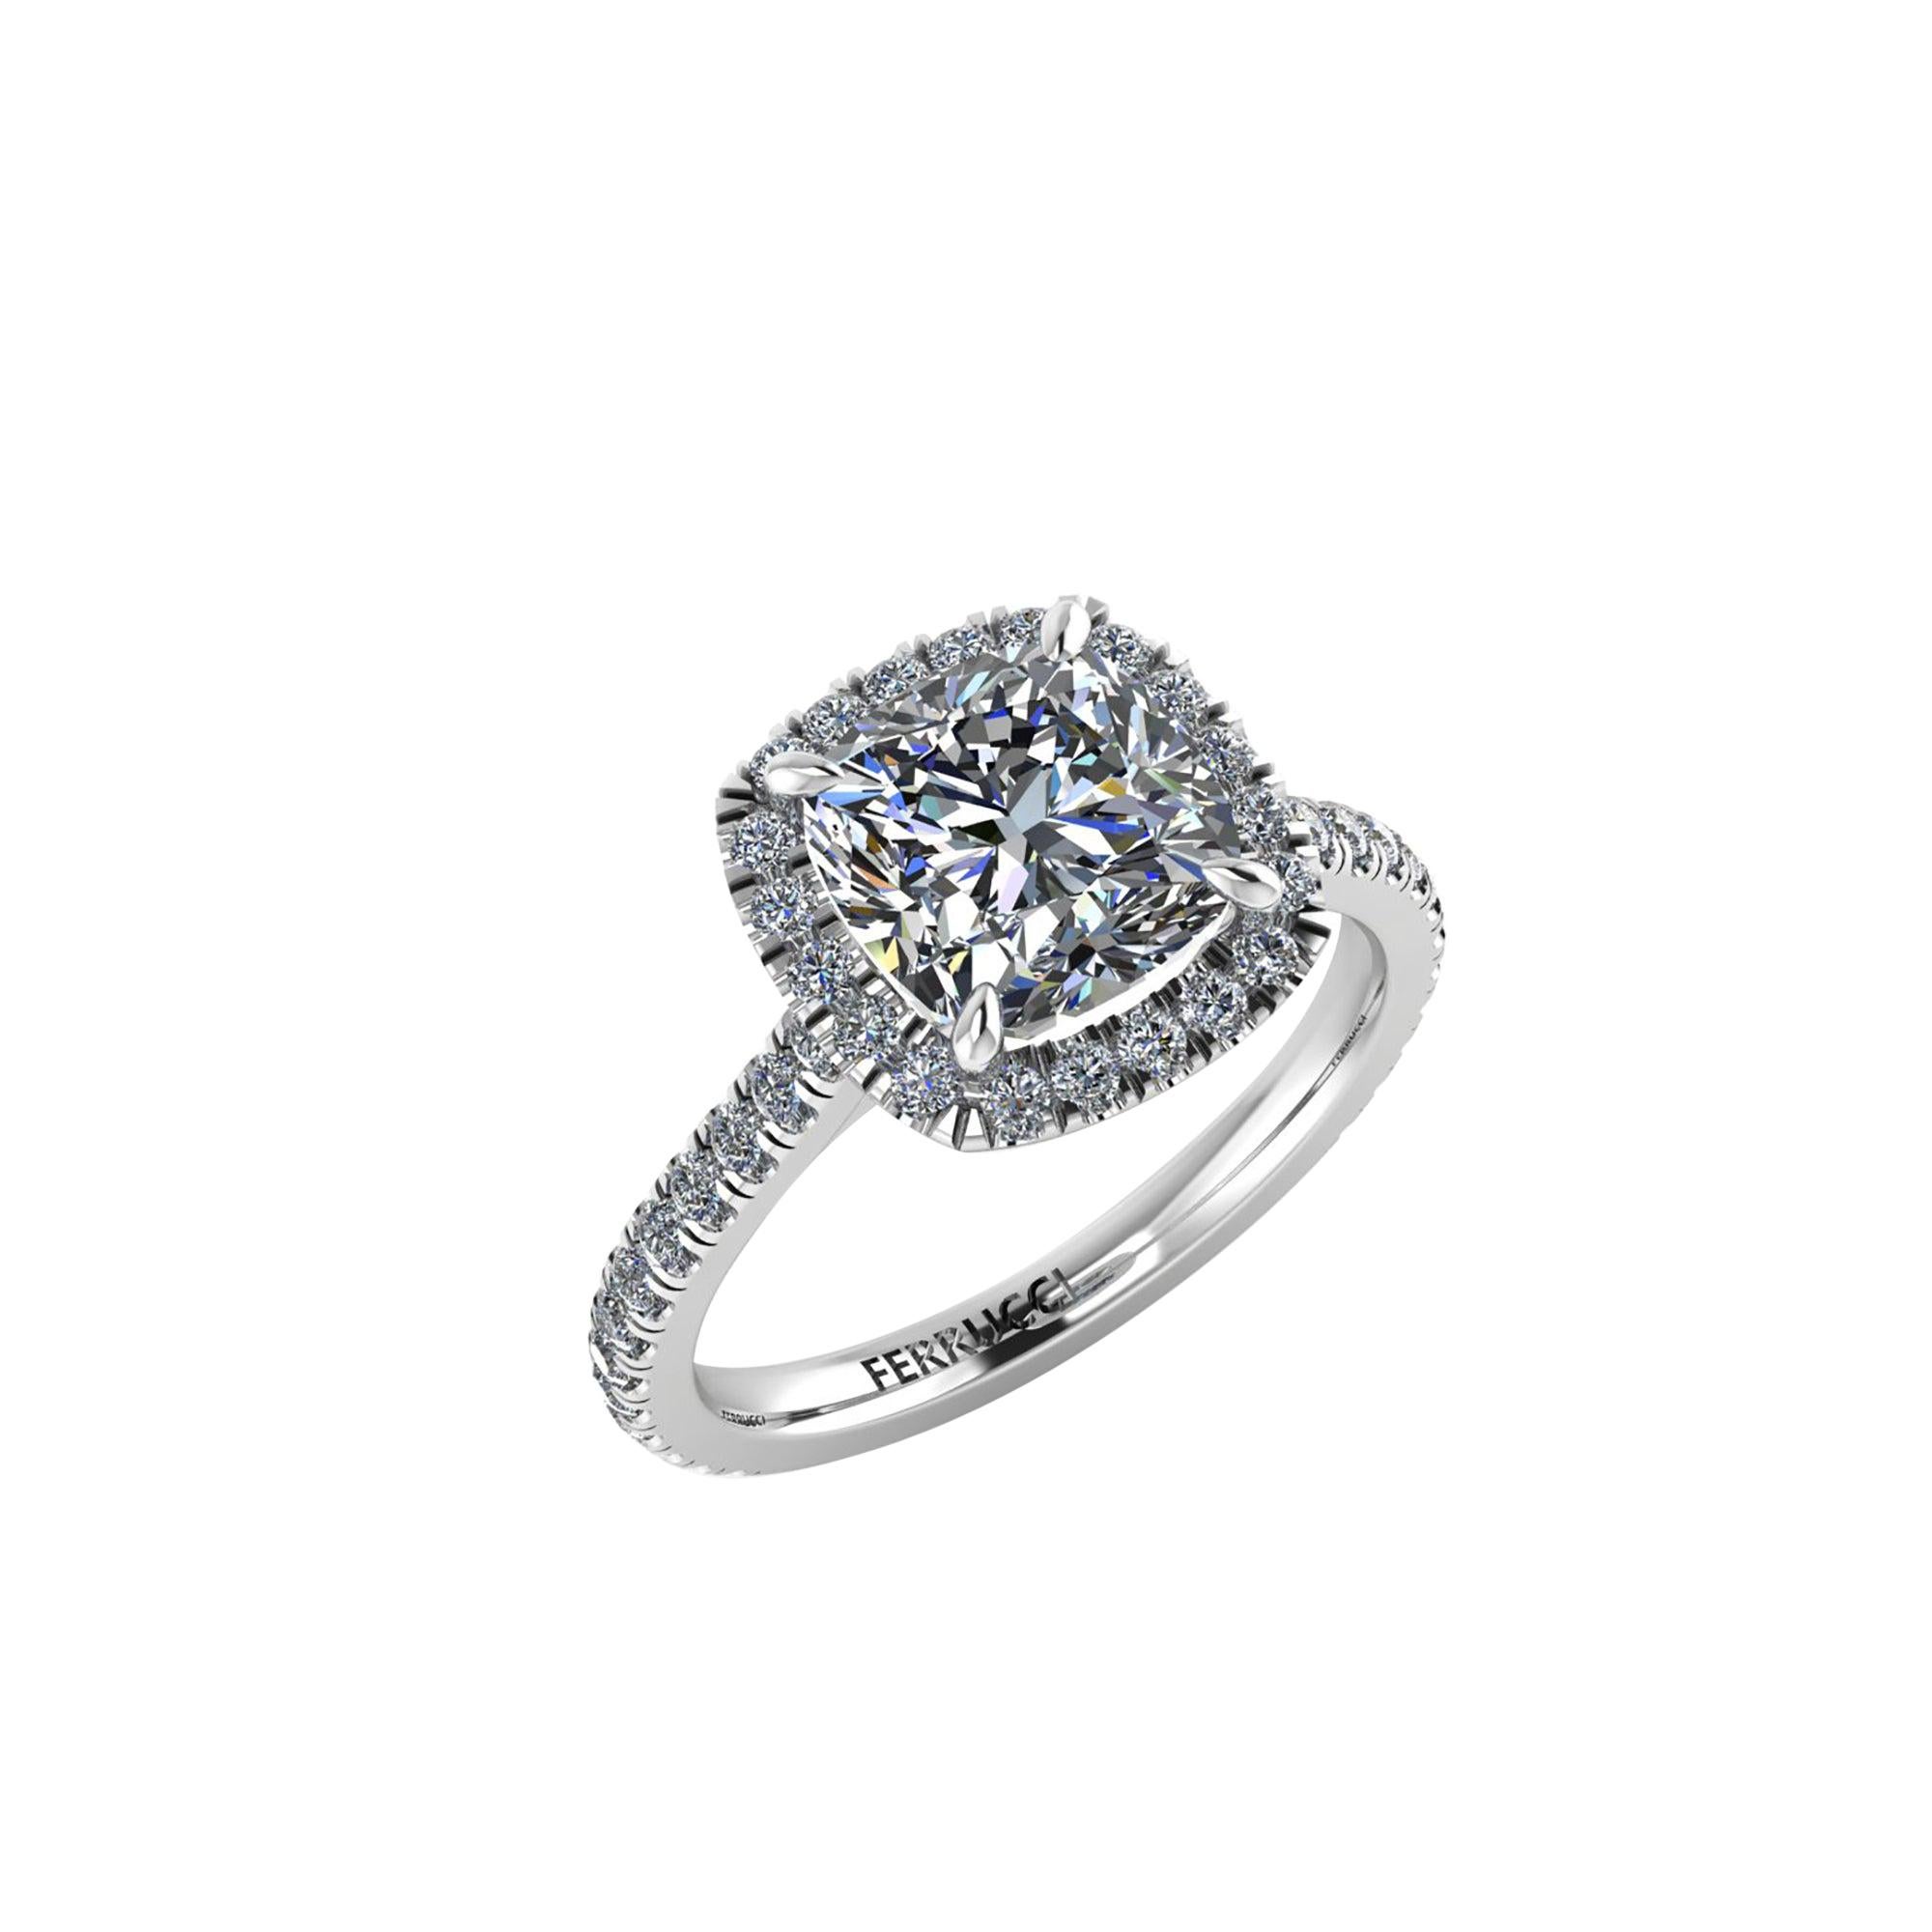 GIA Certified 2.09 Carat Cushion Cut Diamond I Color Pave Engagement Ring